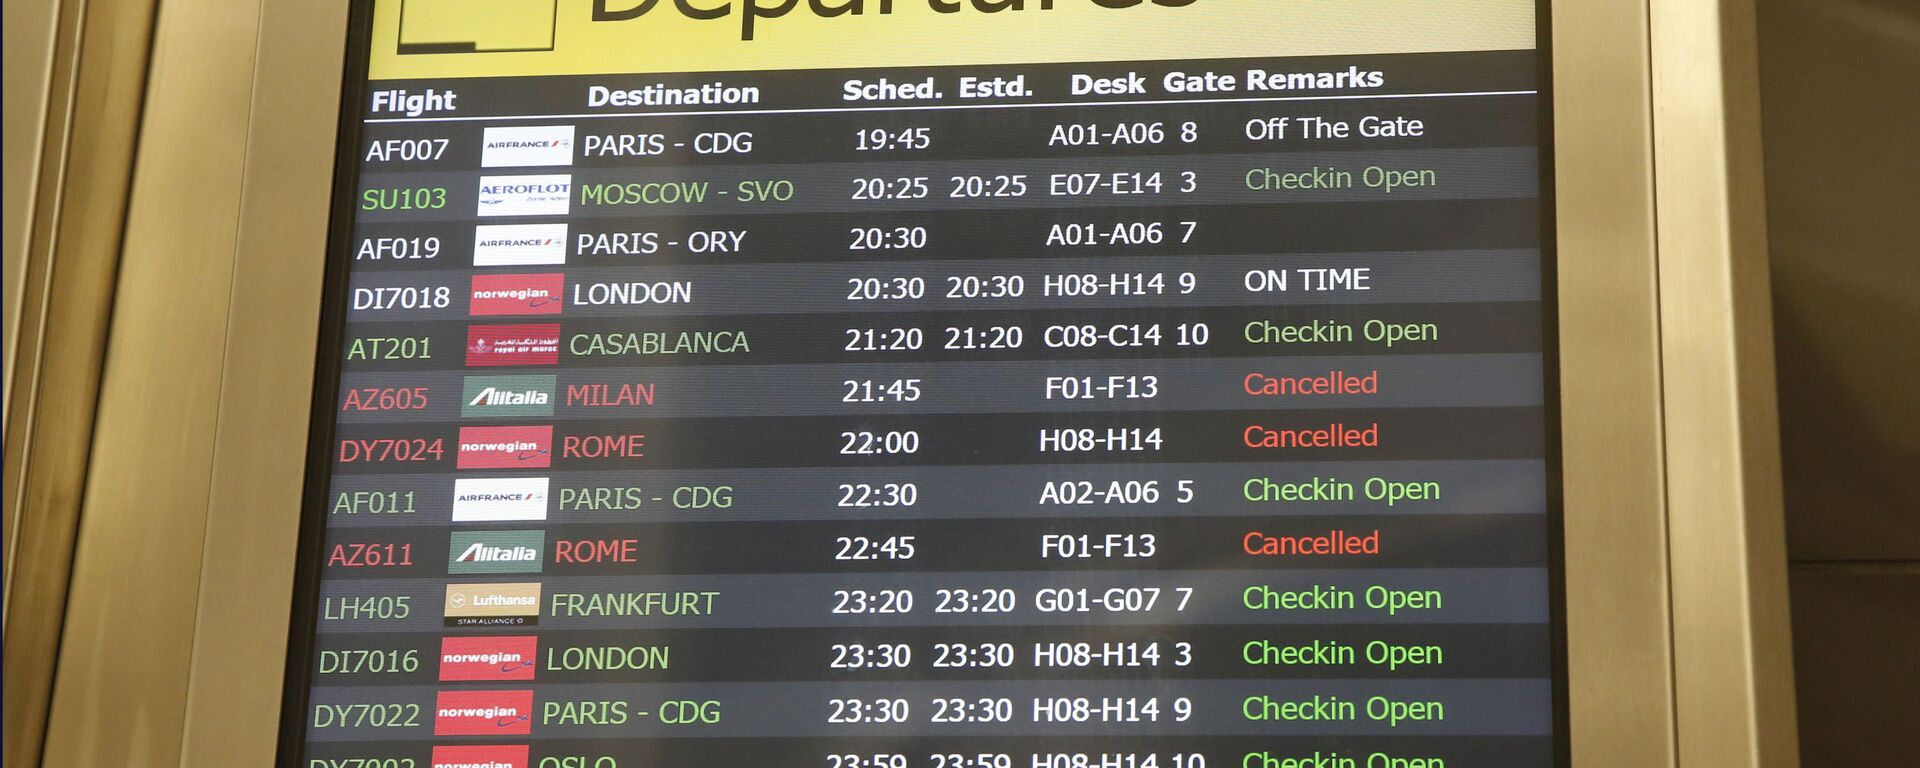 Several airlines with canceled flights are shown on a departures board at JFK airport's Terminal 1, Friday, March 13, 2020, in New York. The coronavirus outbreak is affecting the airline industry hard. Travelers from most European countries to the United States are banned for the next 30 days after President Trump announced the ban earlier in the week. Returning passengers will be screened. The global travel industry is already reeling from falling bookings and canceled reservations as people try to avoid contracting and spreading the virus. - Sputnik International, 1920, 15.10.2020